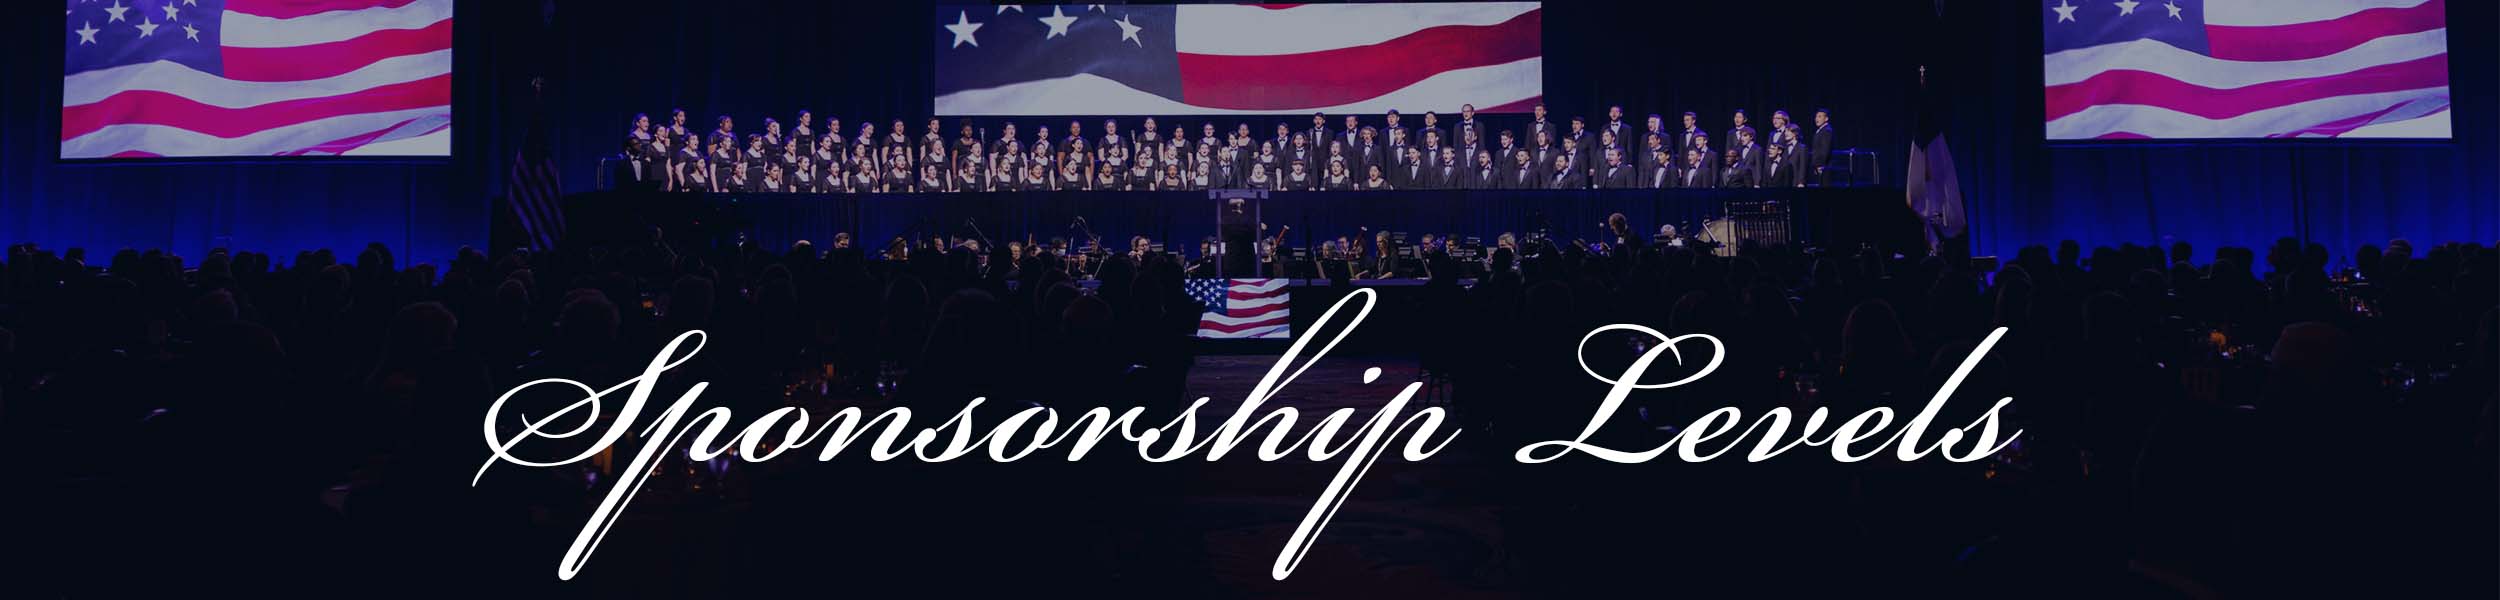 Choir photo with title "Sponsorship Levels"